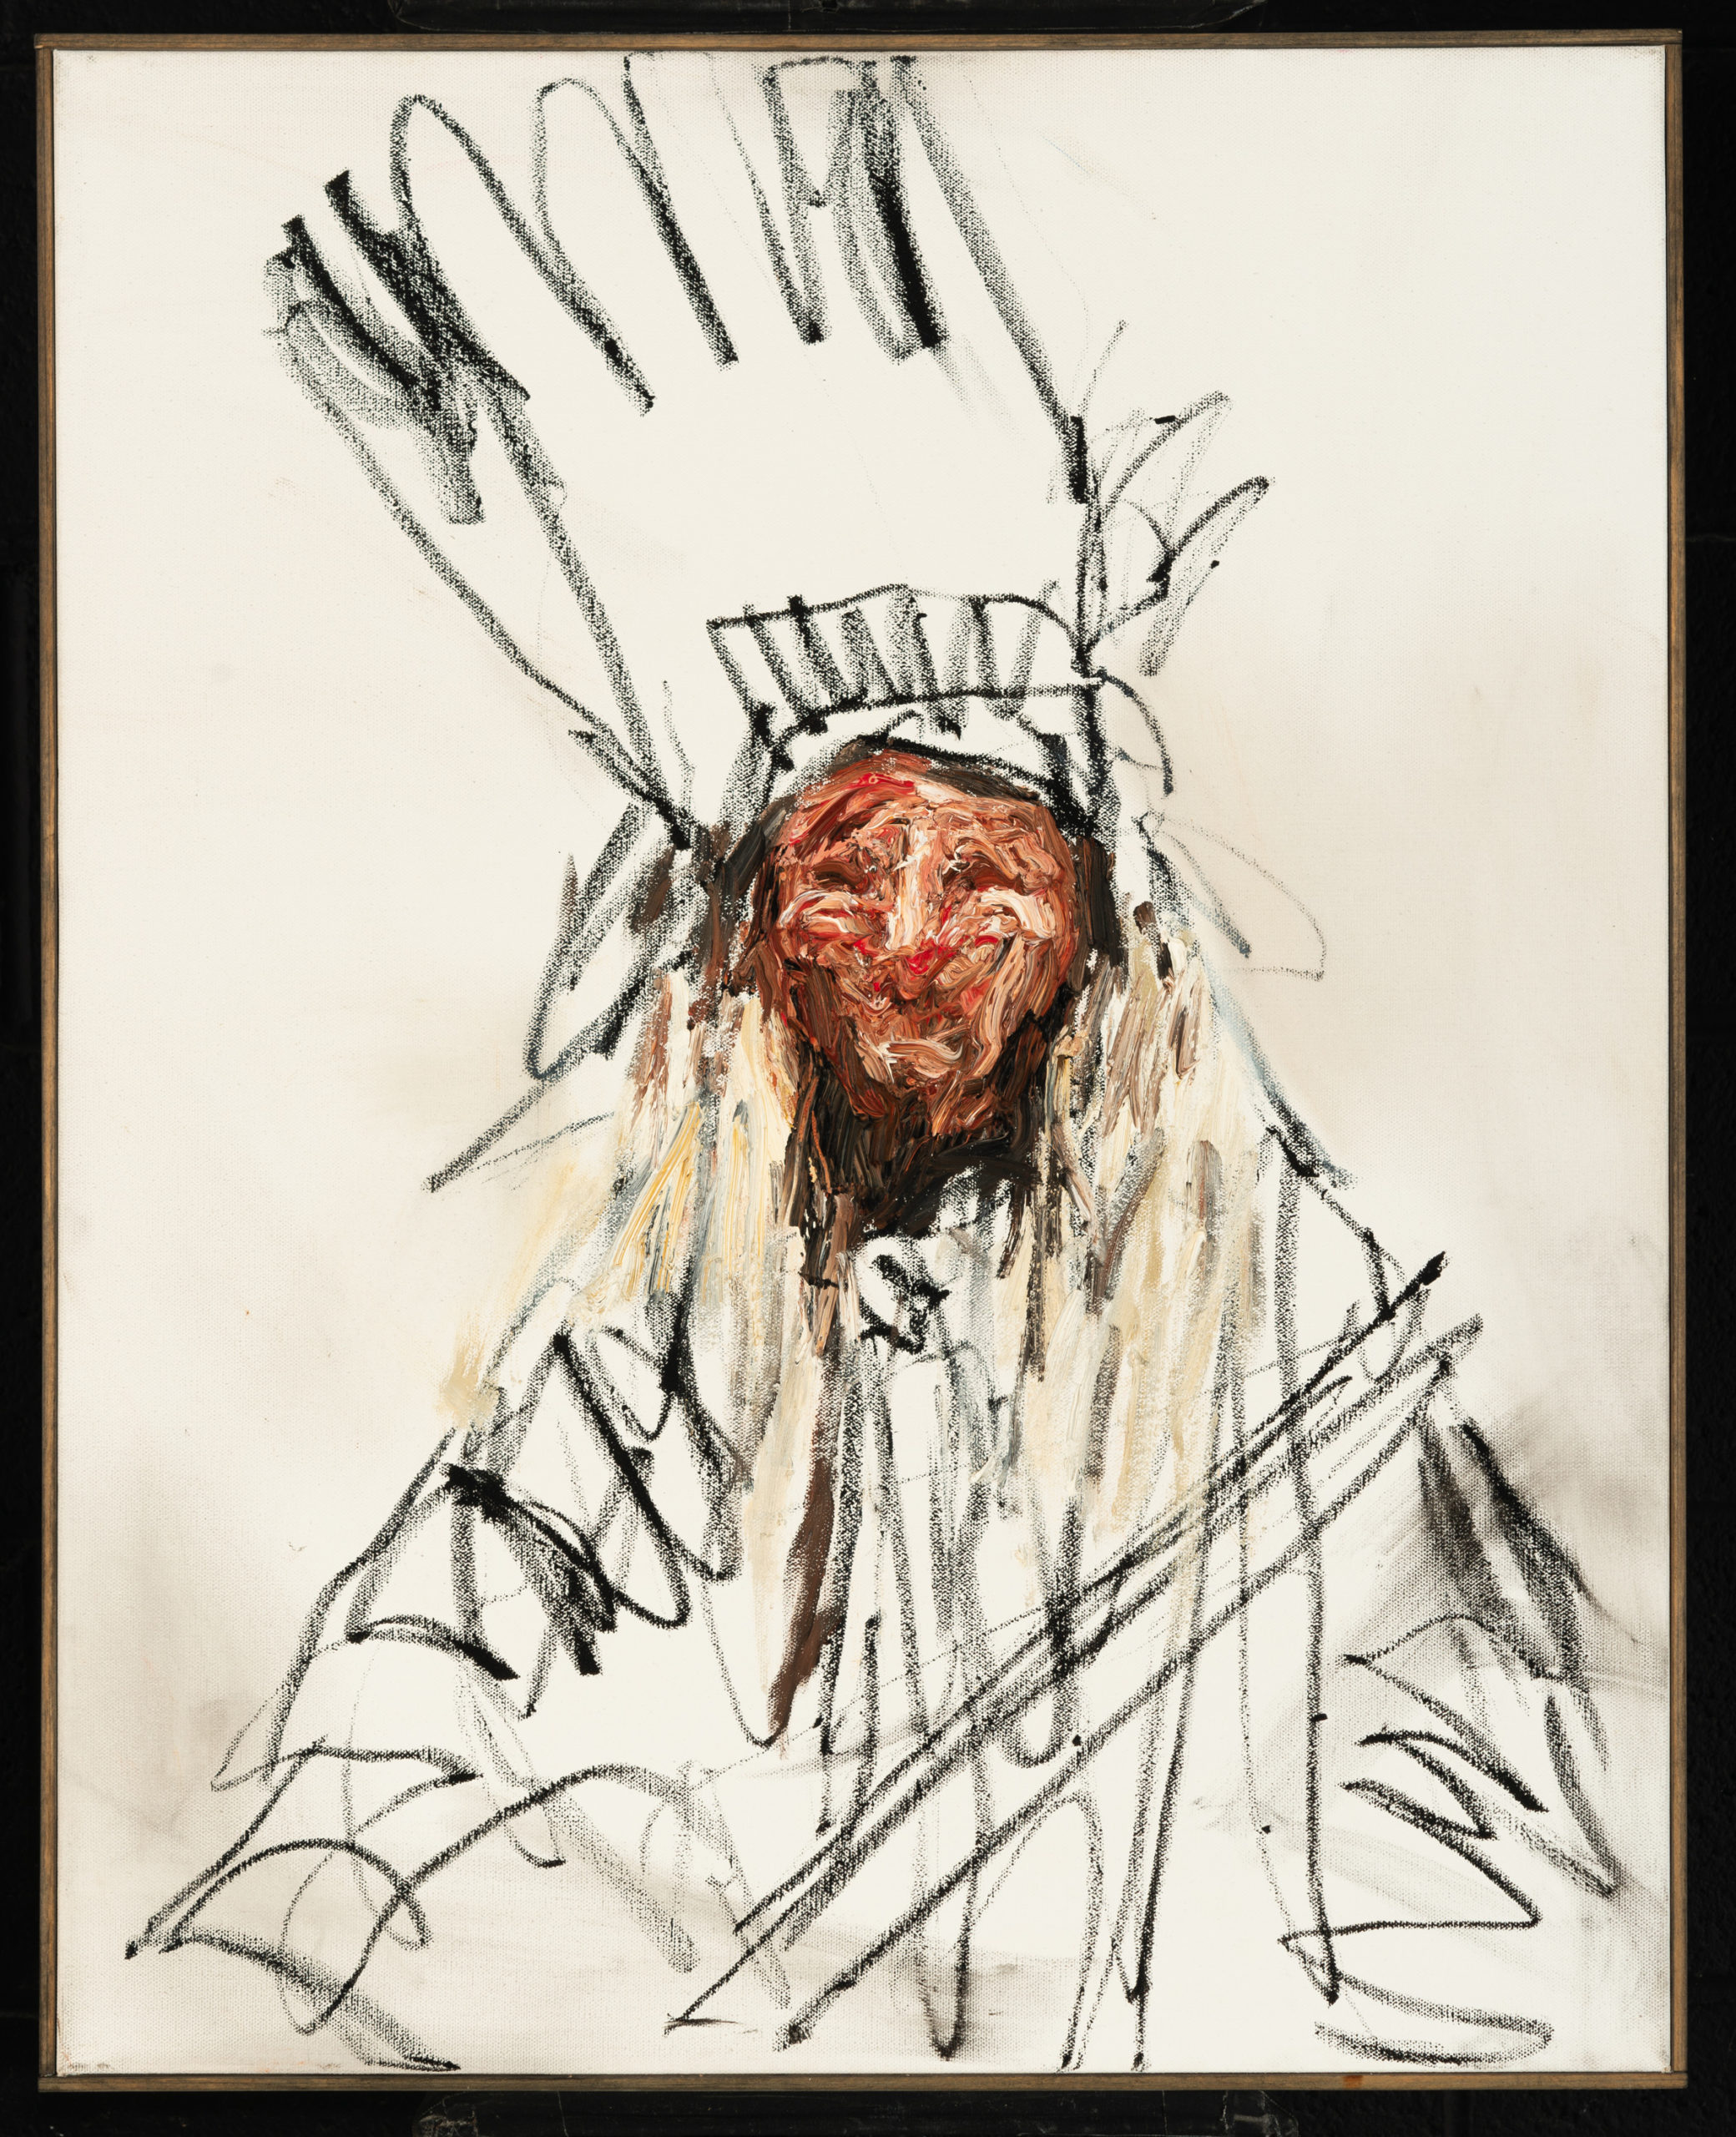 

											Patrick Dean Hubbell</b>

											<em>
												Tack Room</em> 

											<h4>
												Santa Fe: August 12 – October 22, 2022											</h4>

		                																																													<i>Blind Contour Portrait in Black and White,</i>  
																																								2022, 
																																								Oil, oil pastel, charcoal on canvas, wood lattice strip frame, 
																																								30 1/2 x 24 1/2 x 1 3/4 inches 
																								
		                				